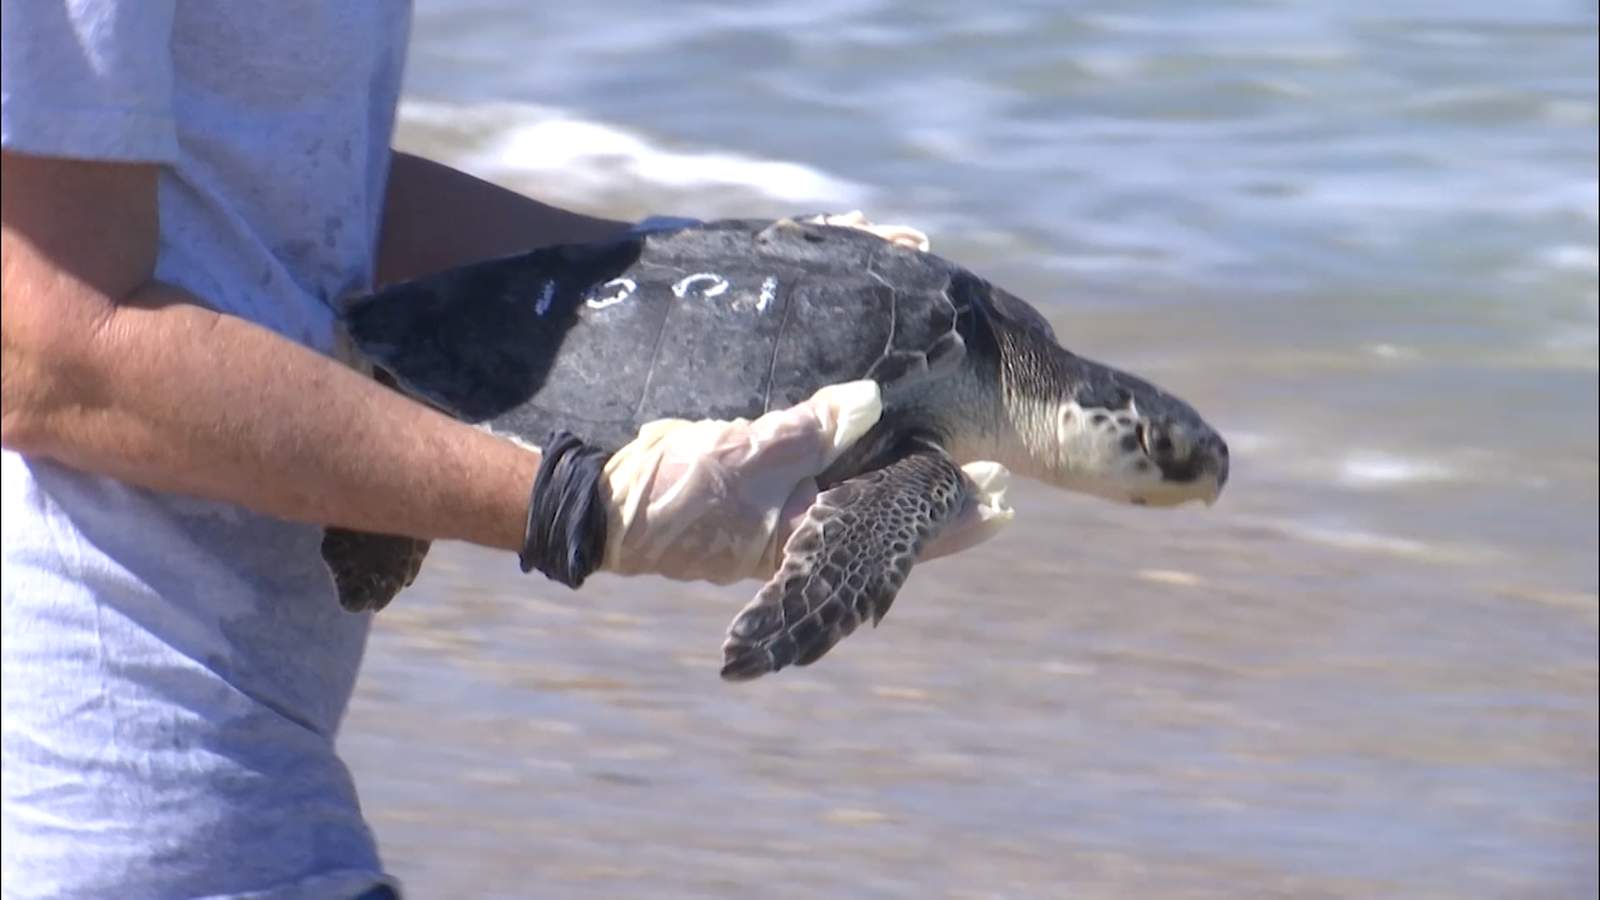 37 rescued, rehabbed sea turtles released at Canaveral National Seashore